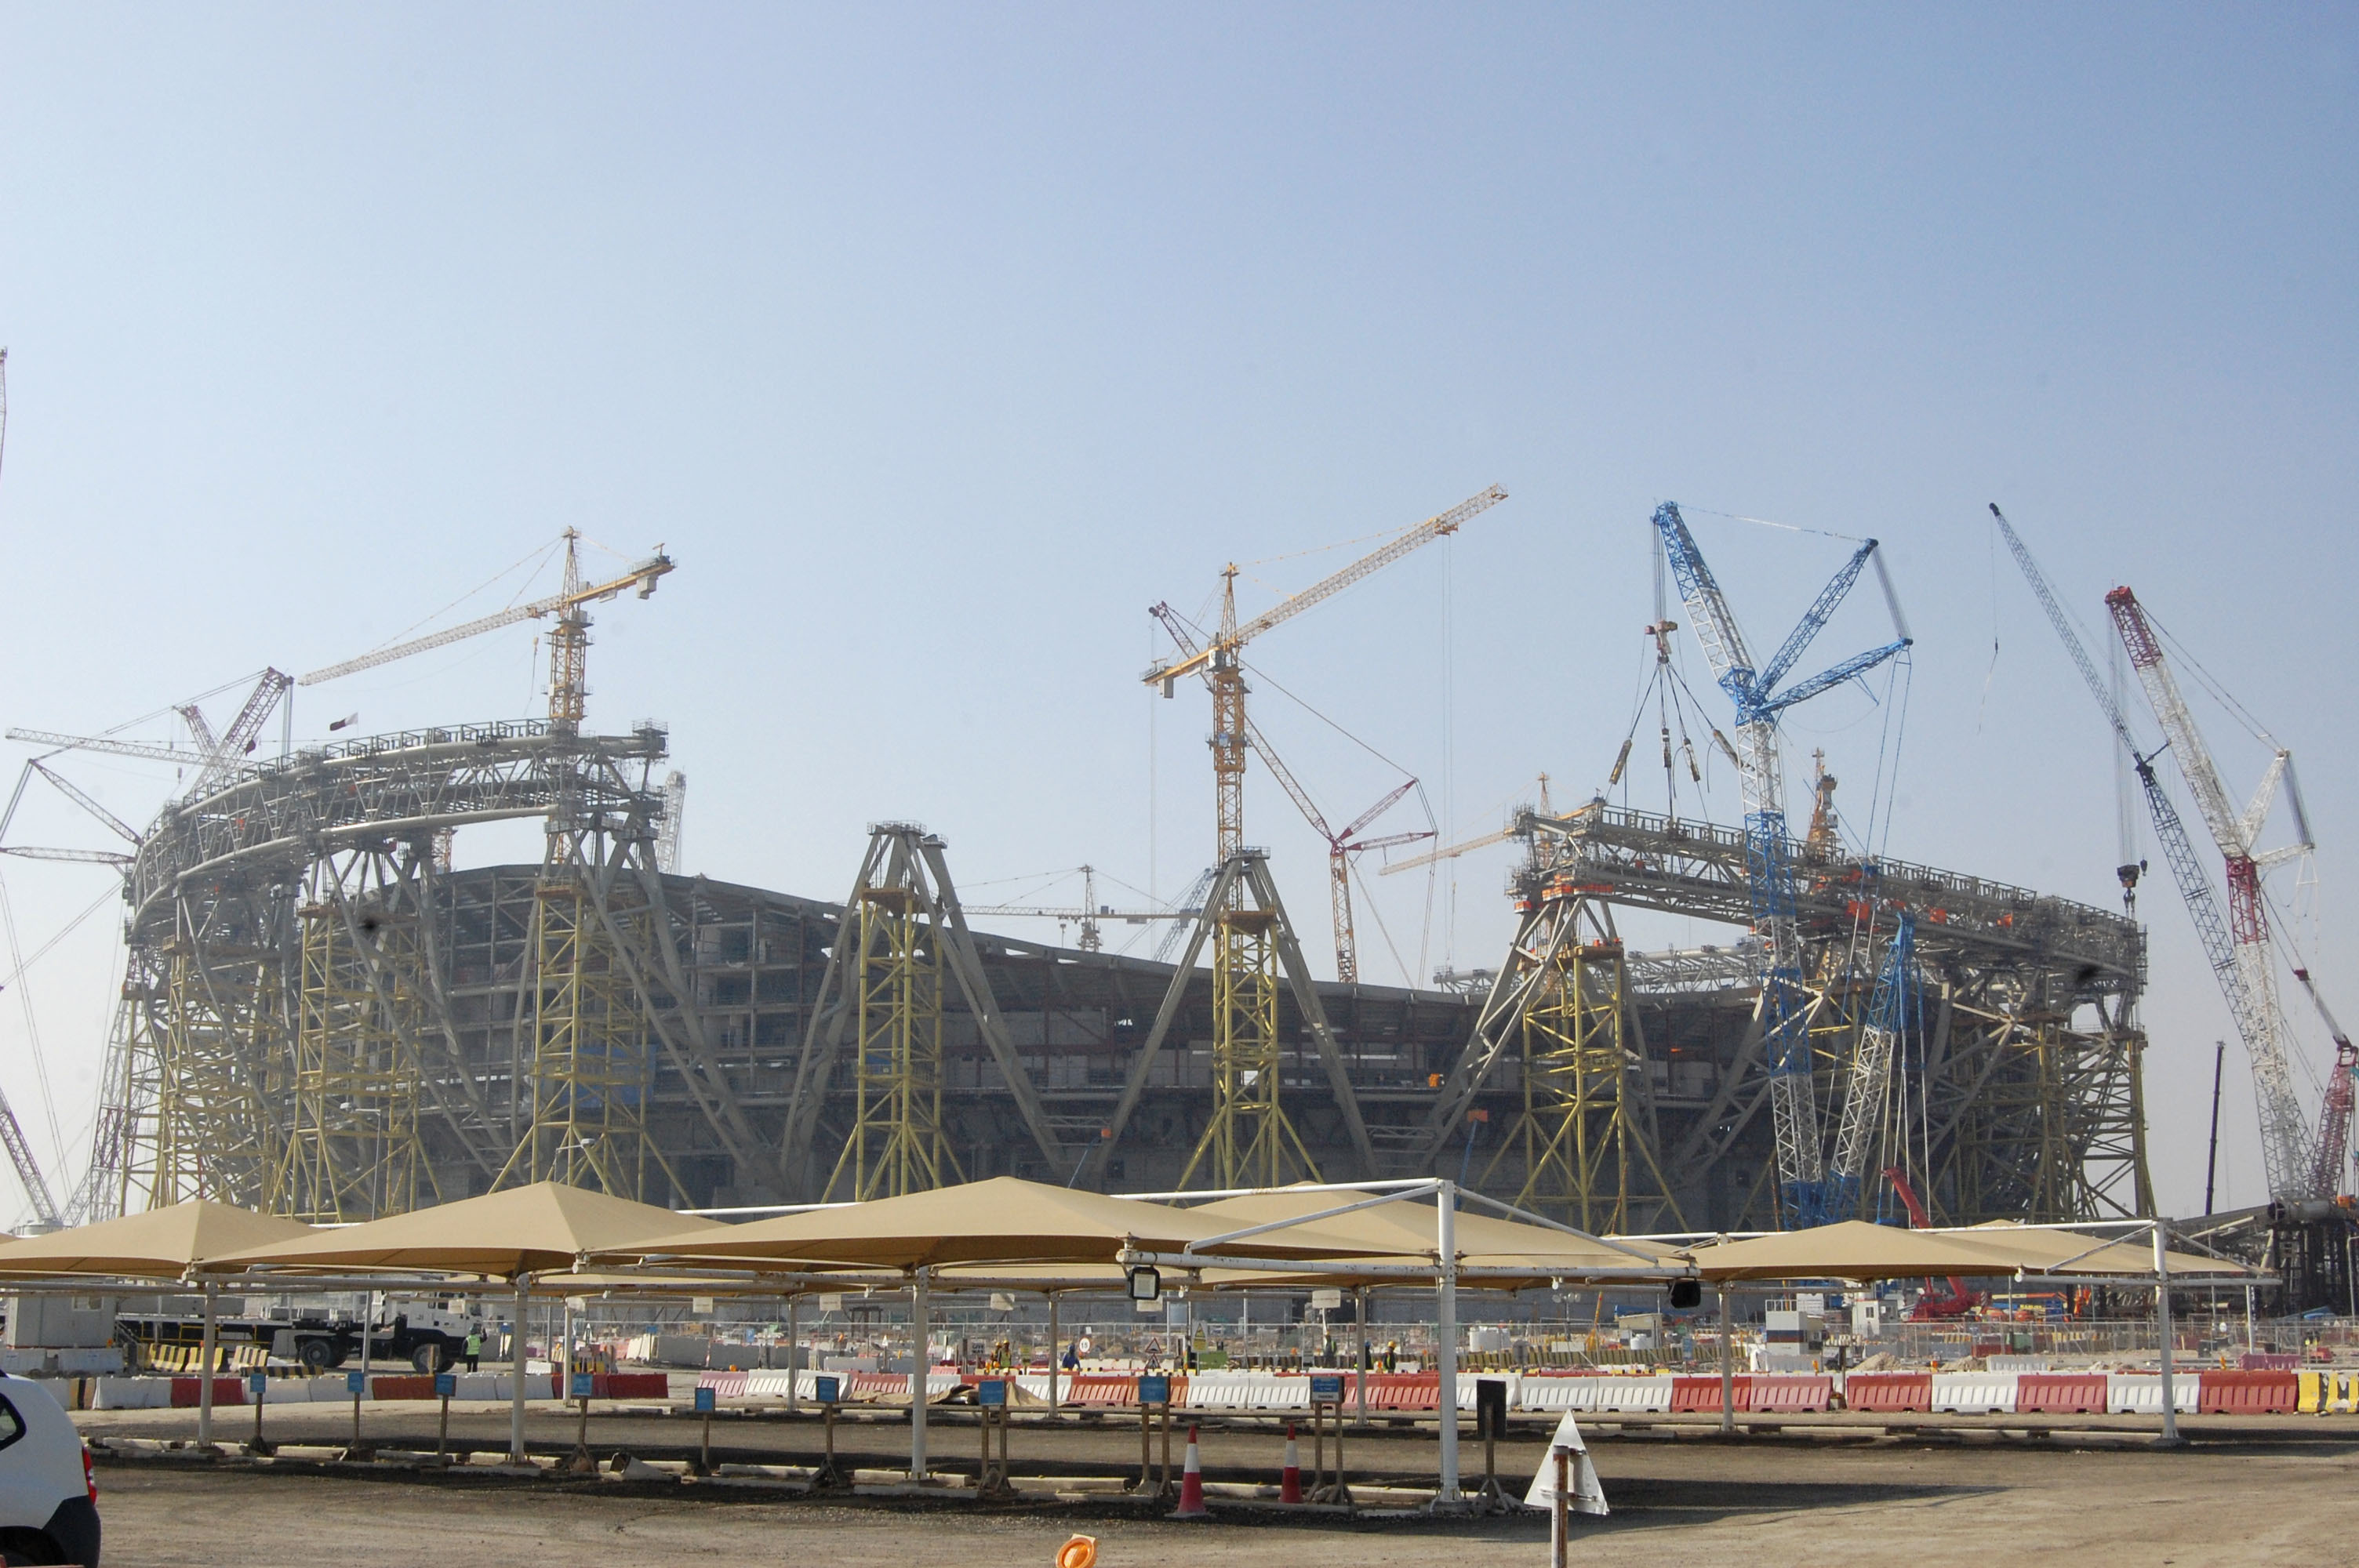 Photo taken Dec. 20, 2019, in Doha, shows Lusail Stadium -- which is scheduled to host the opening and final matches of the 2022 FIFA World Cup -- under construction. (Kyodo via AP Images) ==Kyodo